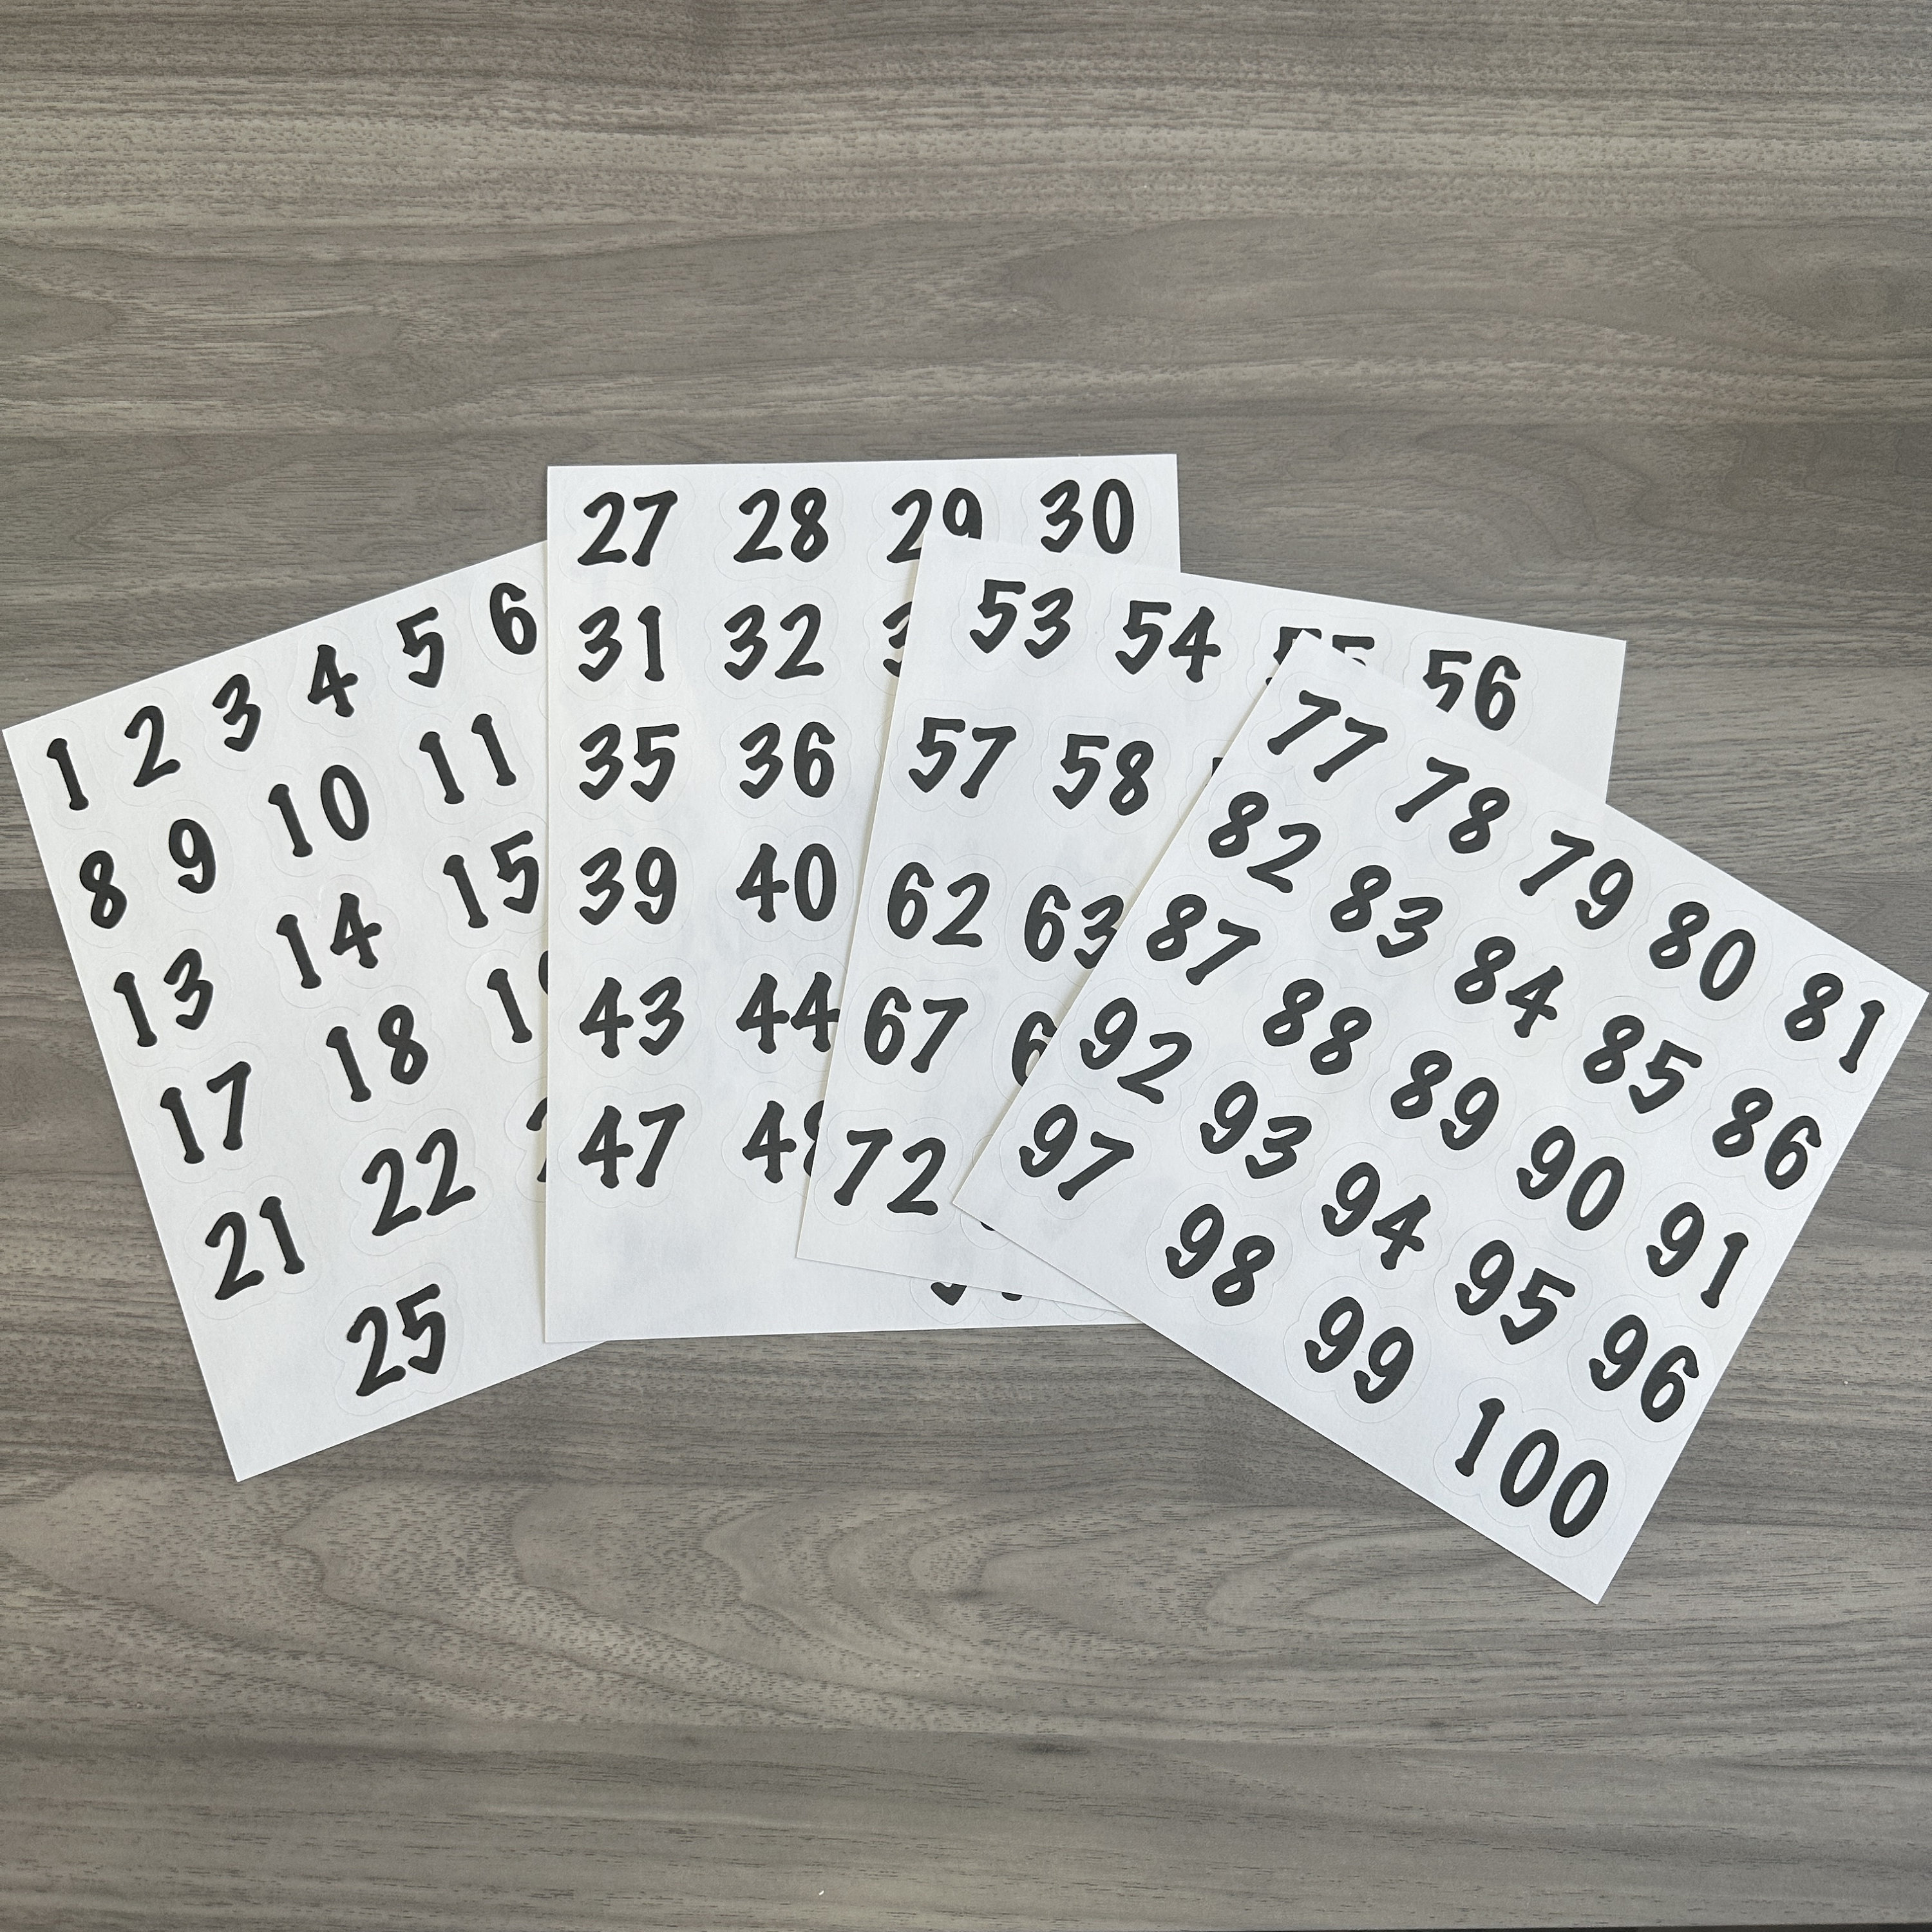 25 Sheets 1 to 100 Vinyl Consecutive Number Stickers 0.4 Inch Small